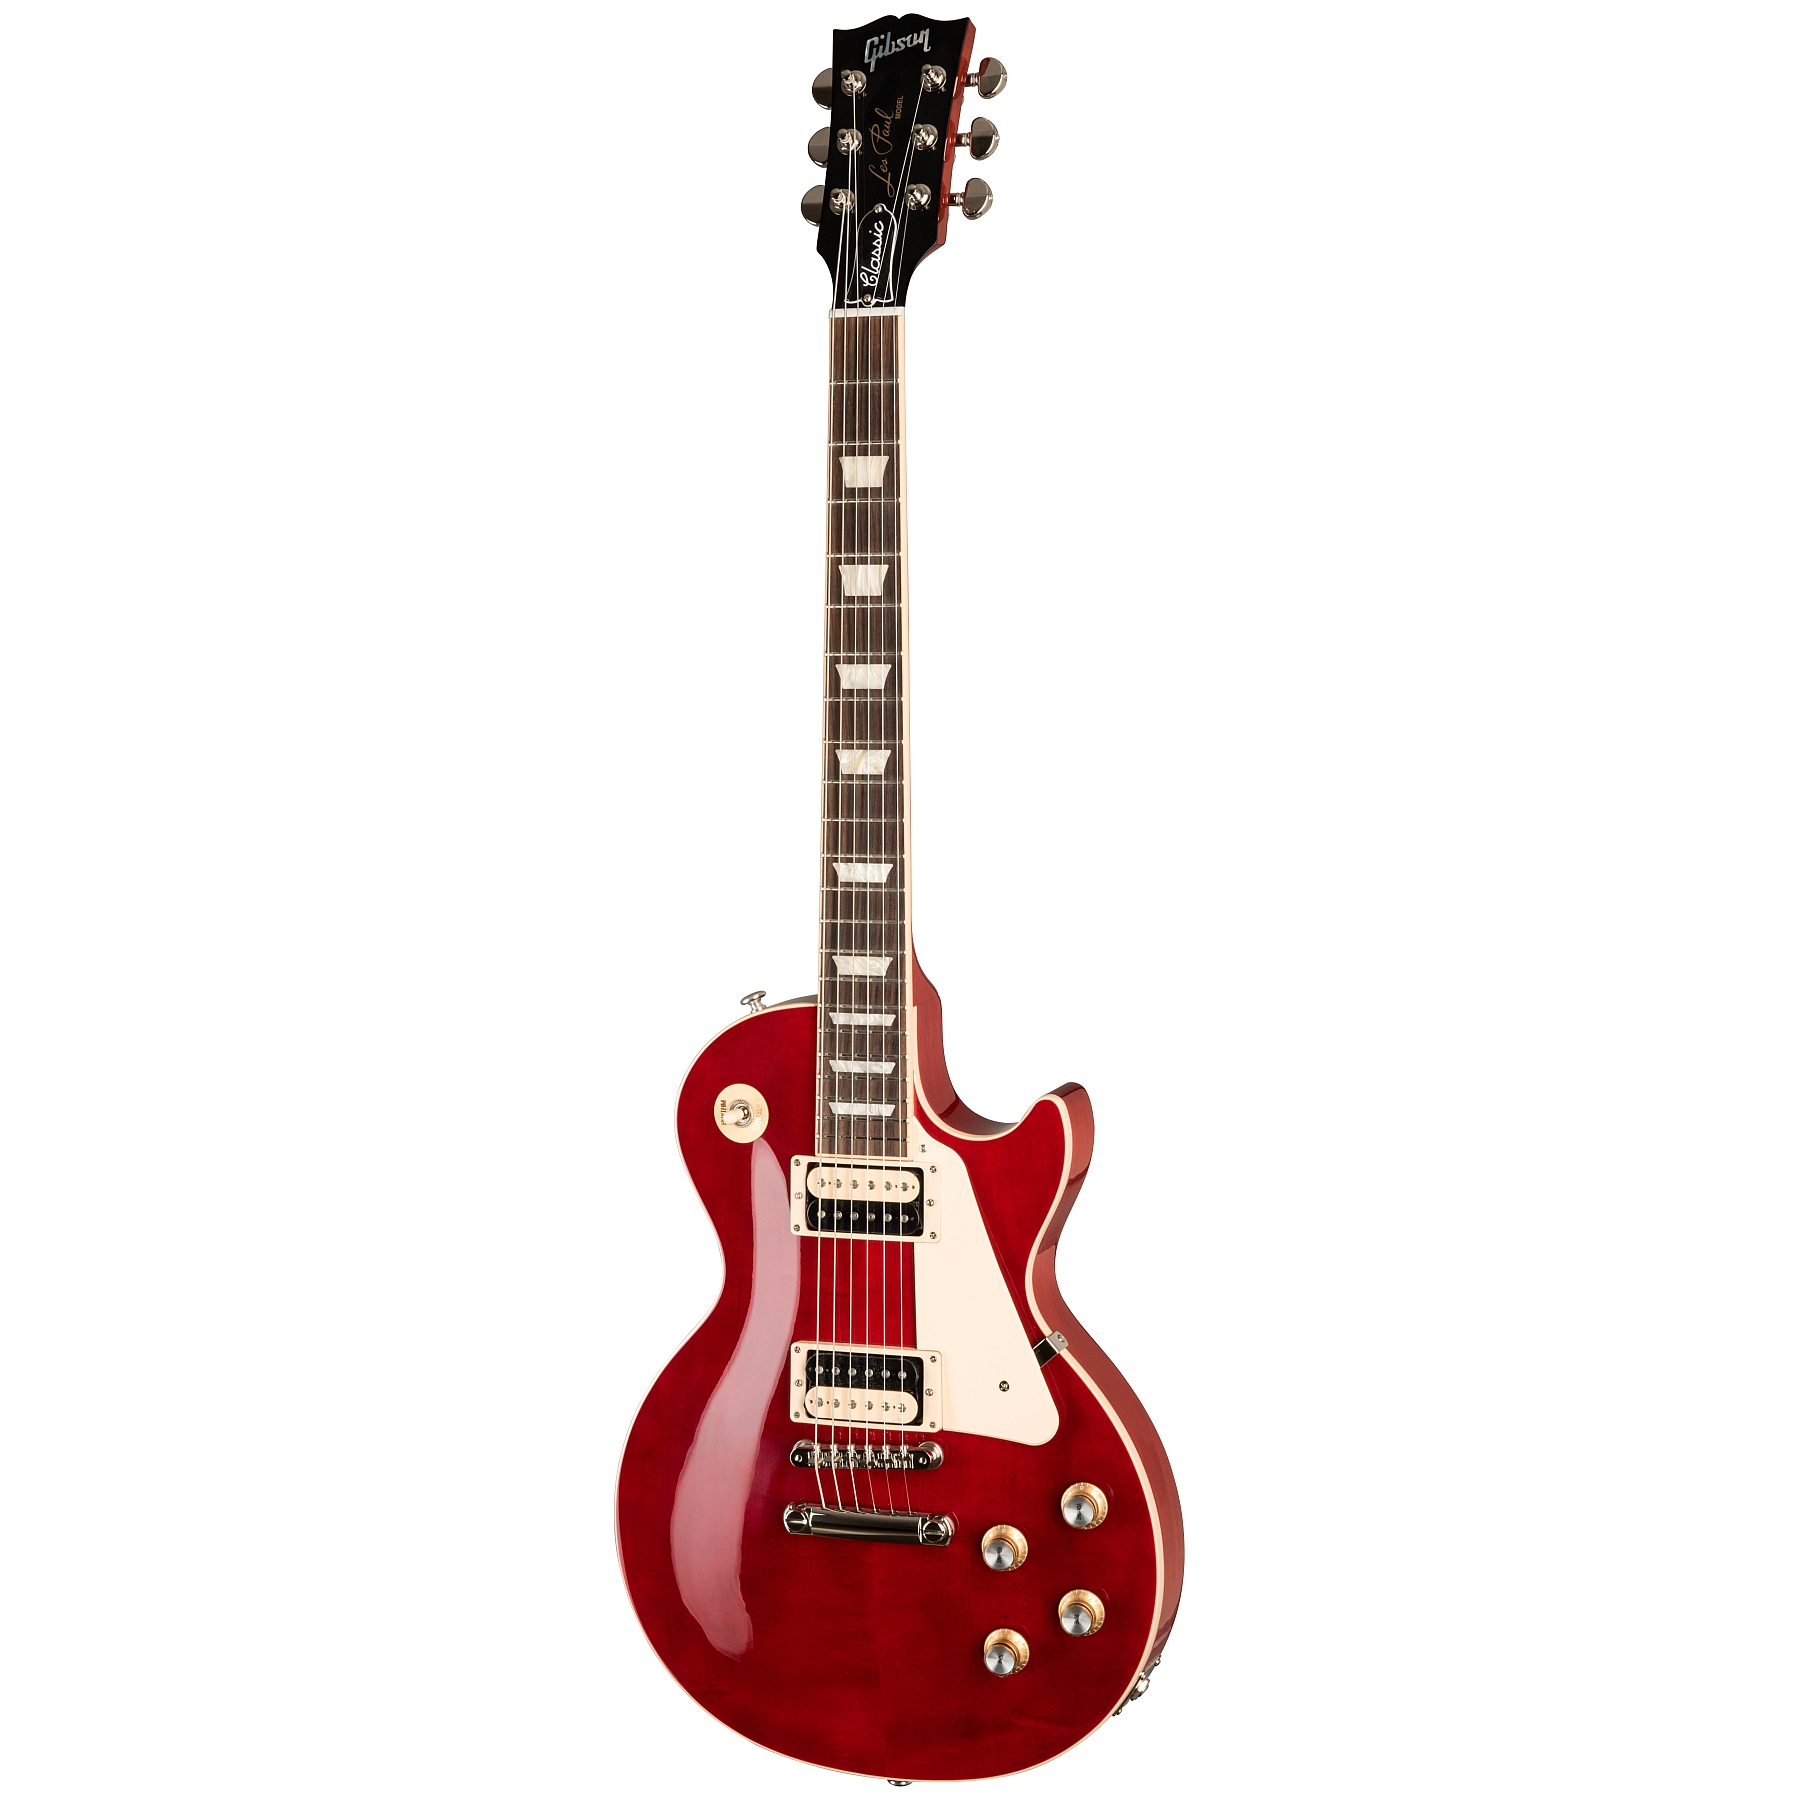 Gibson Les Paul Classic Translucent Cherry inklusive Koffer